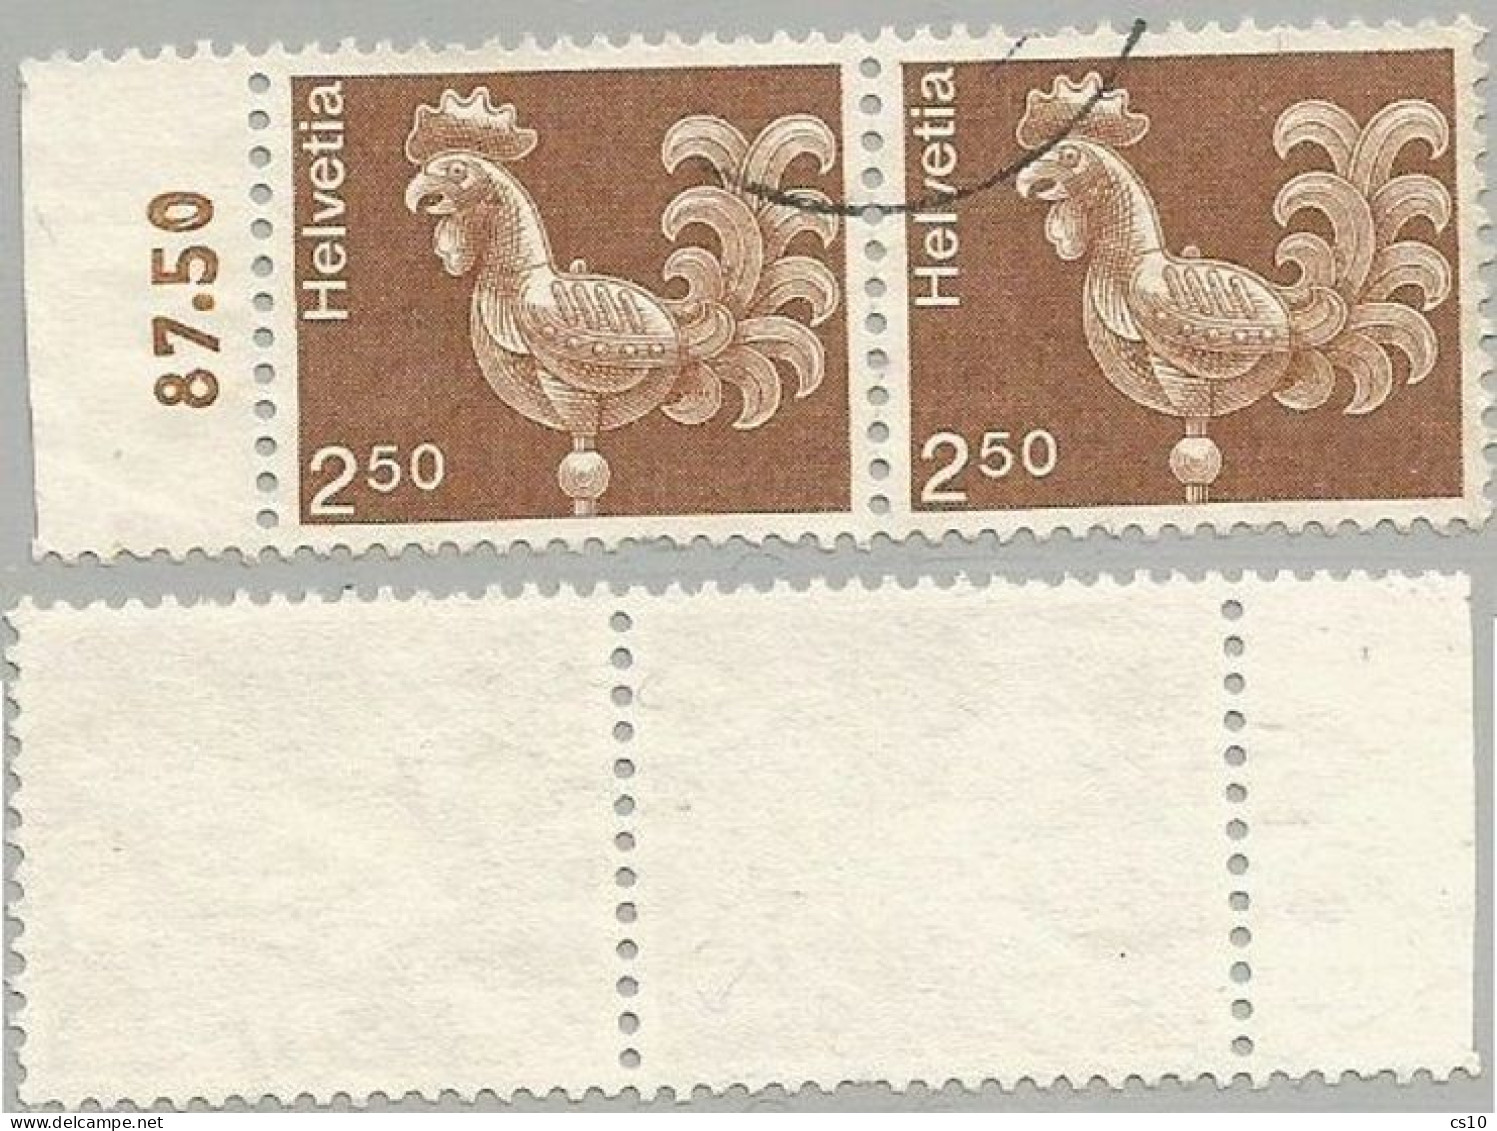 Suisse 1975 Artworks Wheatercock FS.2,50 - Scarce Variety NON FLUO PAPER - #2 Pcs In Horiz. Pair With Sheet Margin - Gebraucht